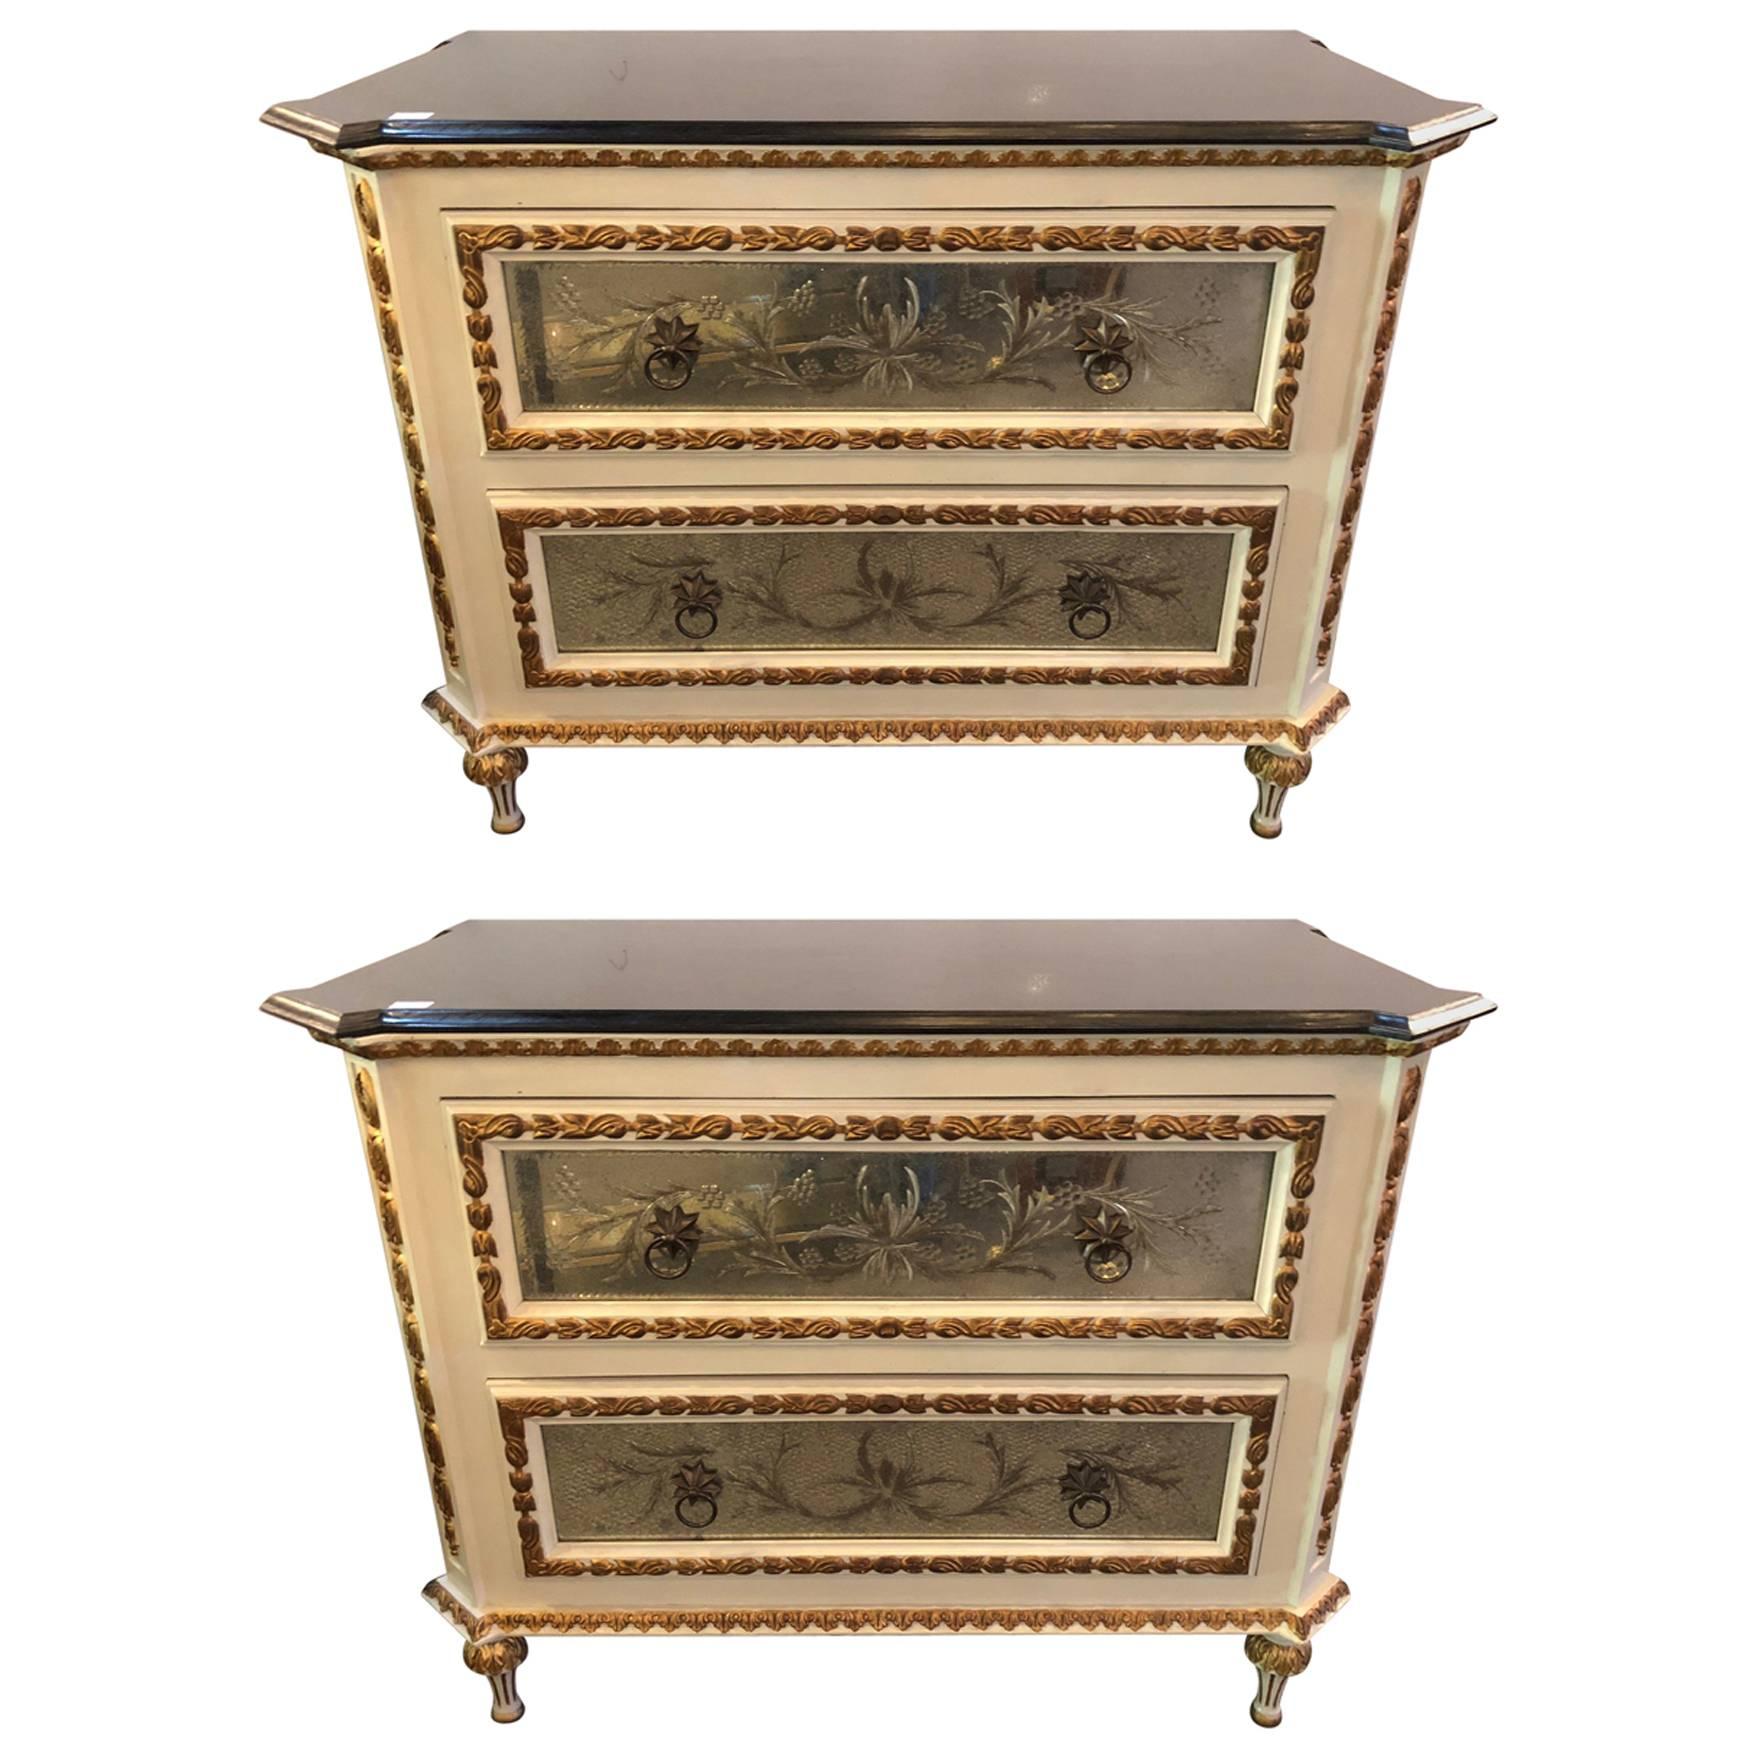 Pair of Painted Parcel-Gilt Etched Mirror Marble Top Commodes by Maison Jansen